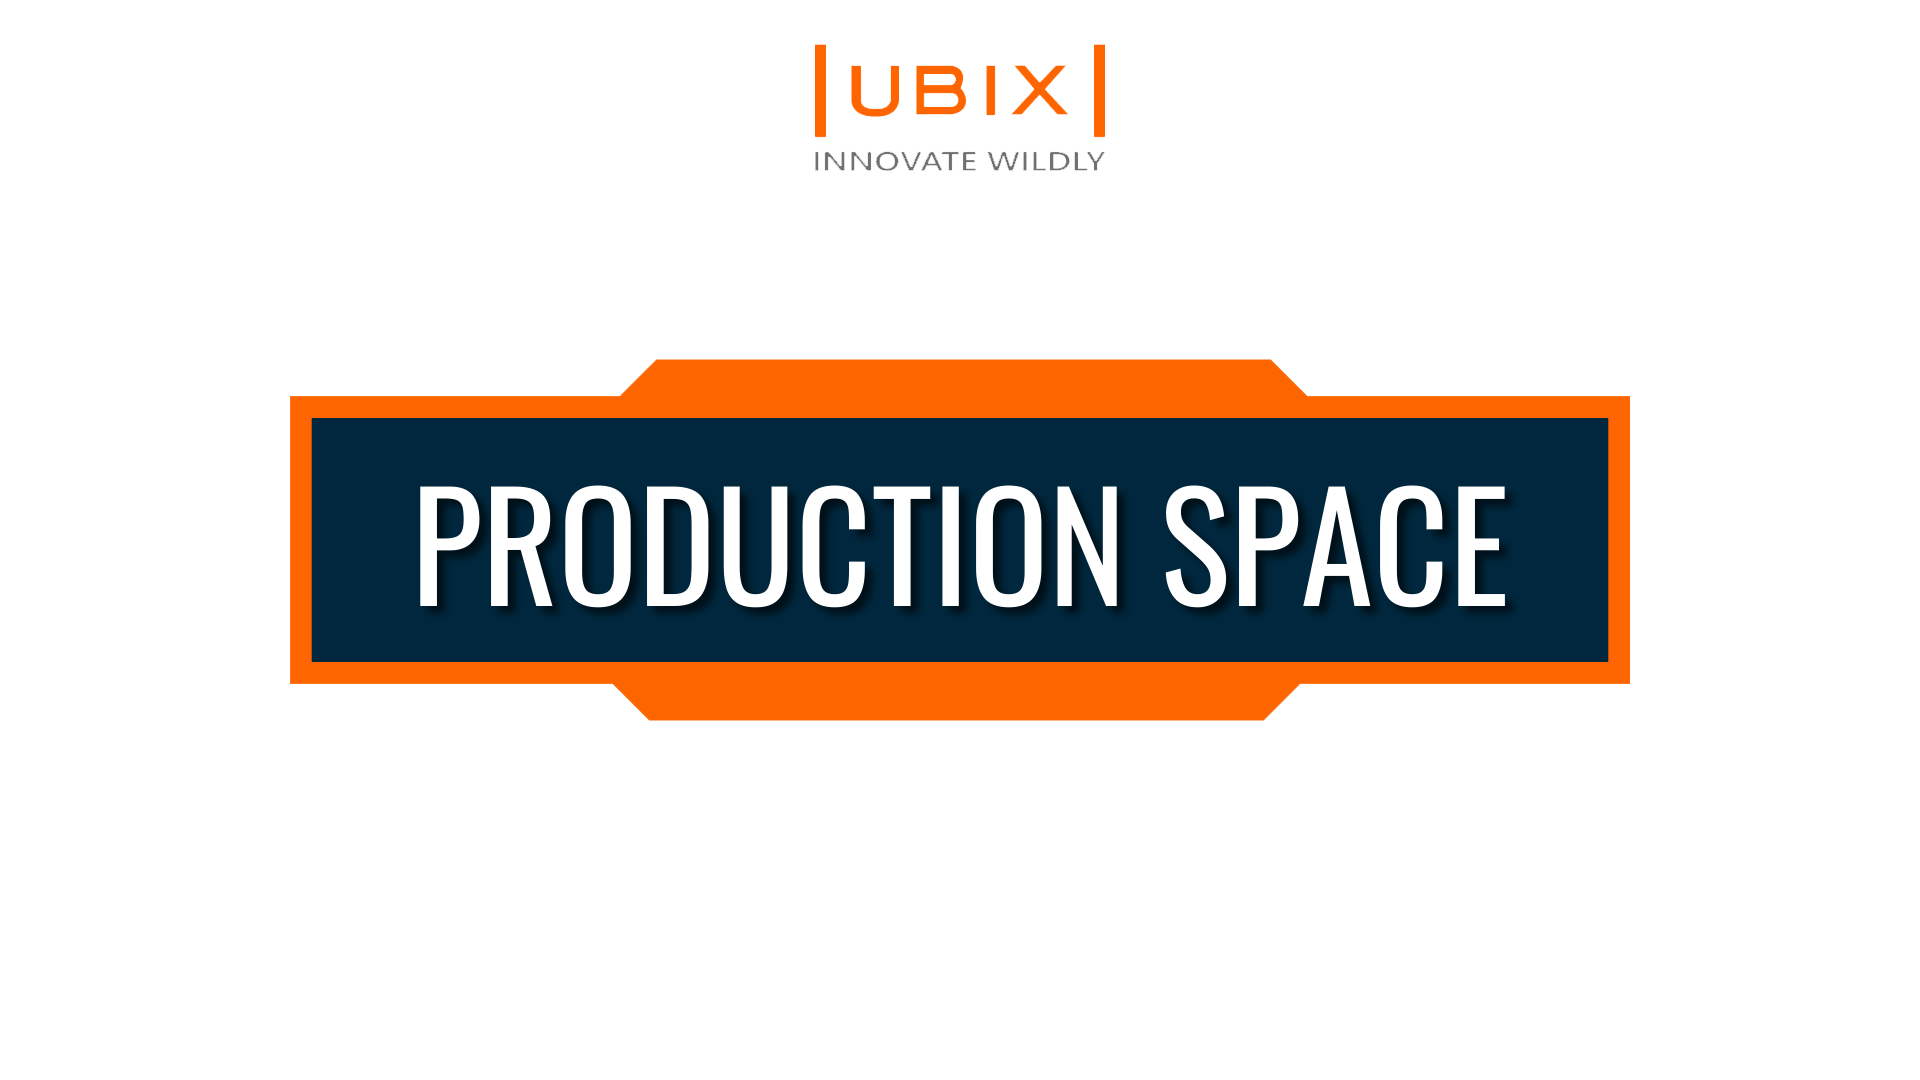 Production space